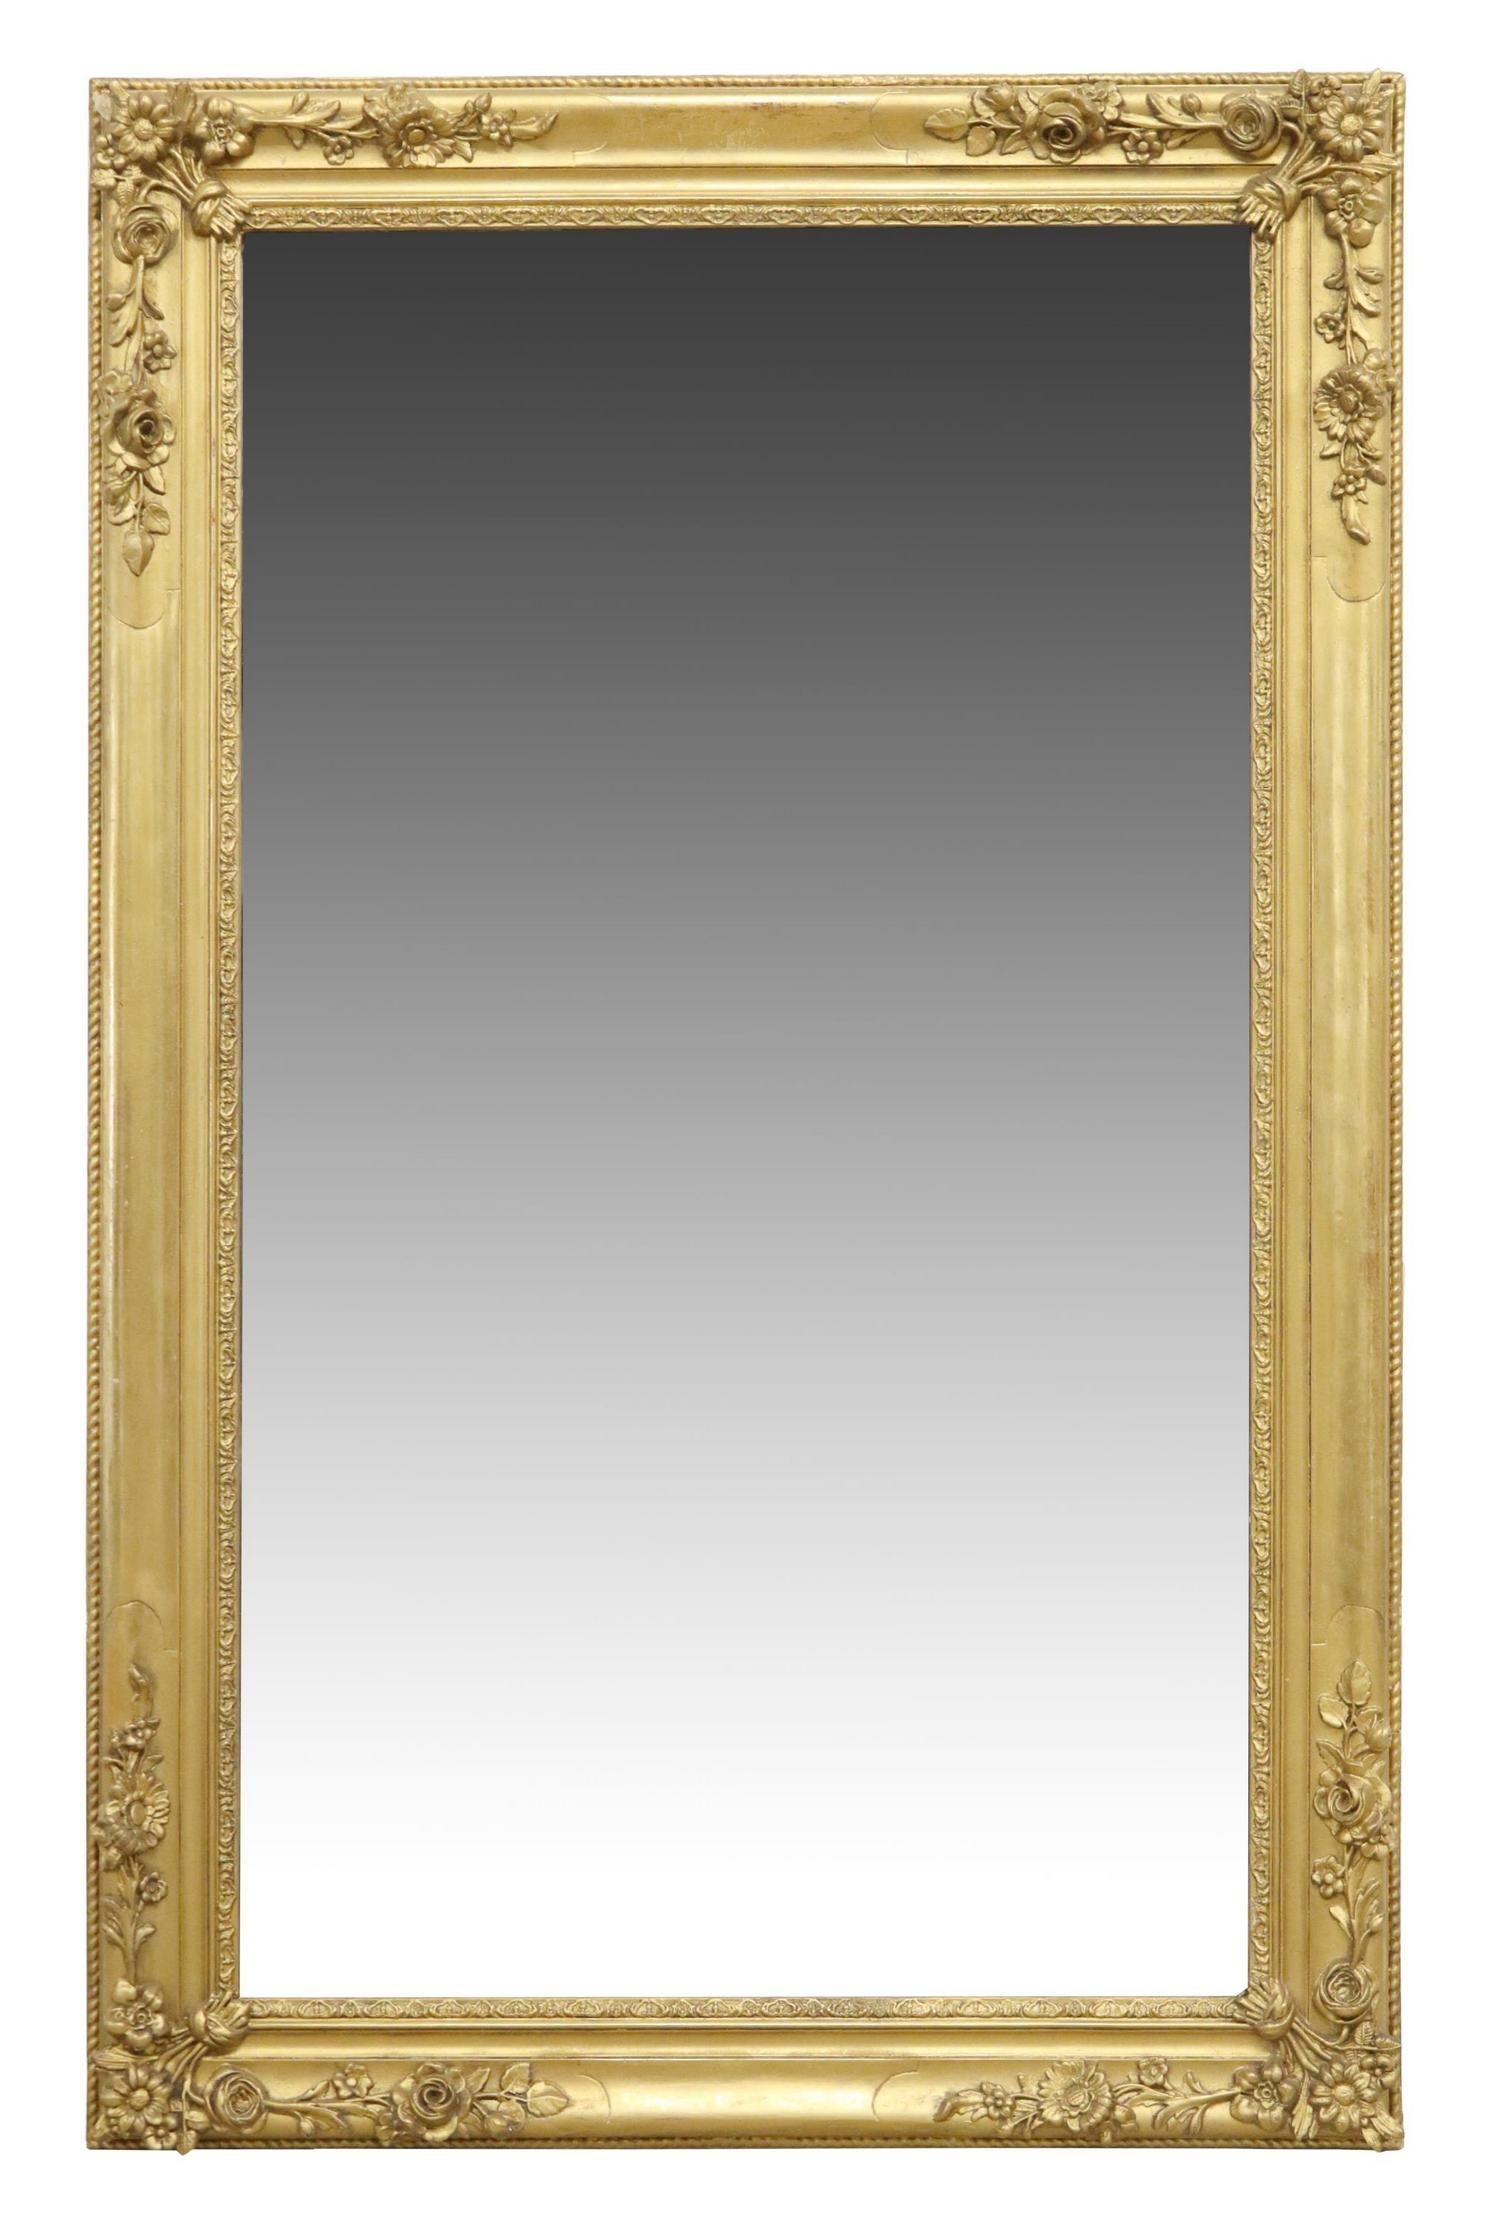 Antique French Louis XV style gilt wood and composition mirror, 19th c. The mirror features a rectangular frame, with floral accents, encasing flat mirror plate, 